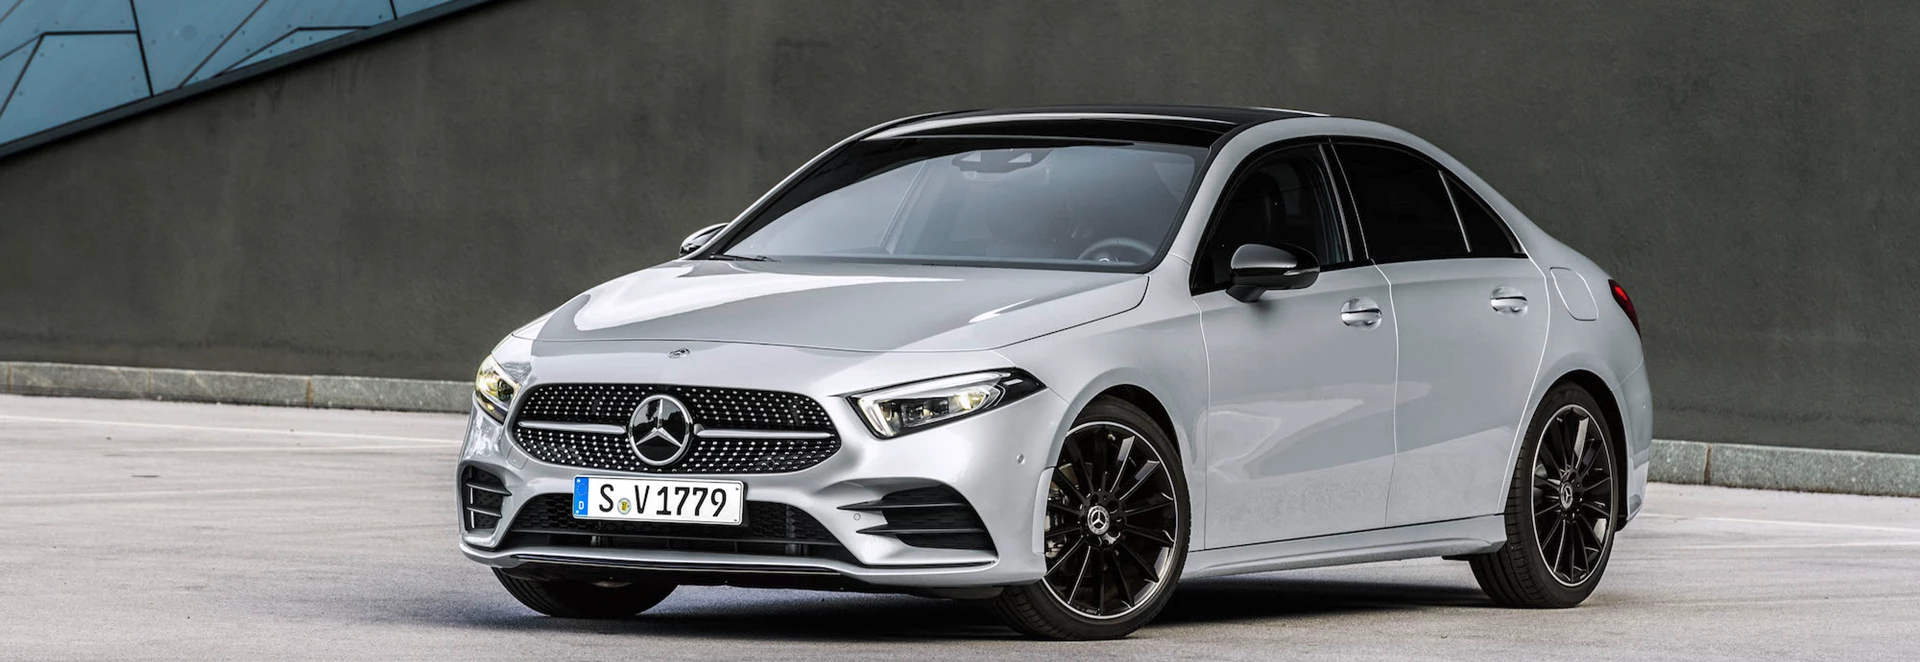 Mercedes-Benz A-Class Saloon pricing revealed